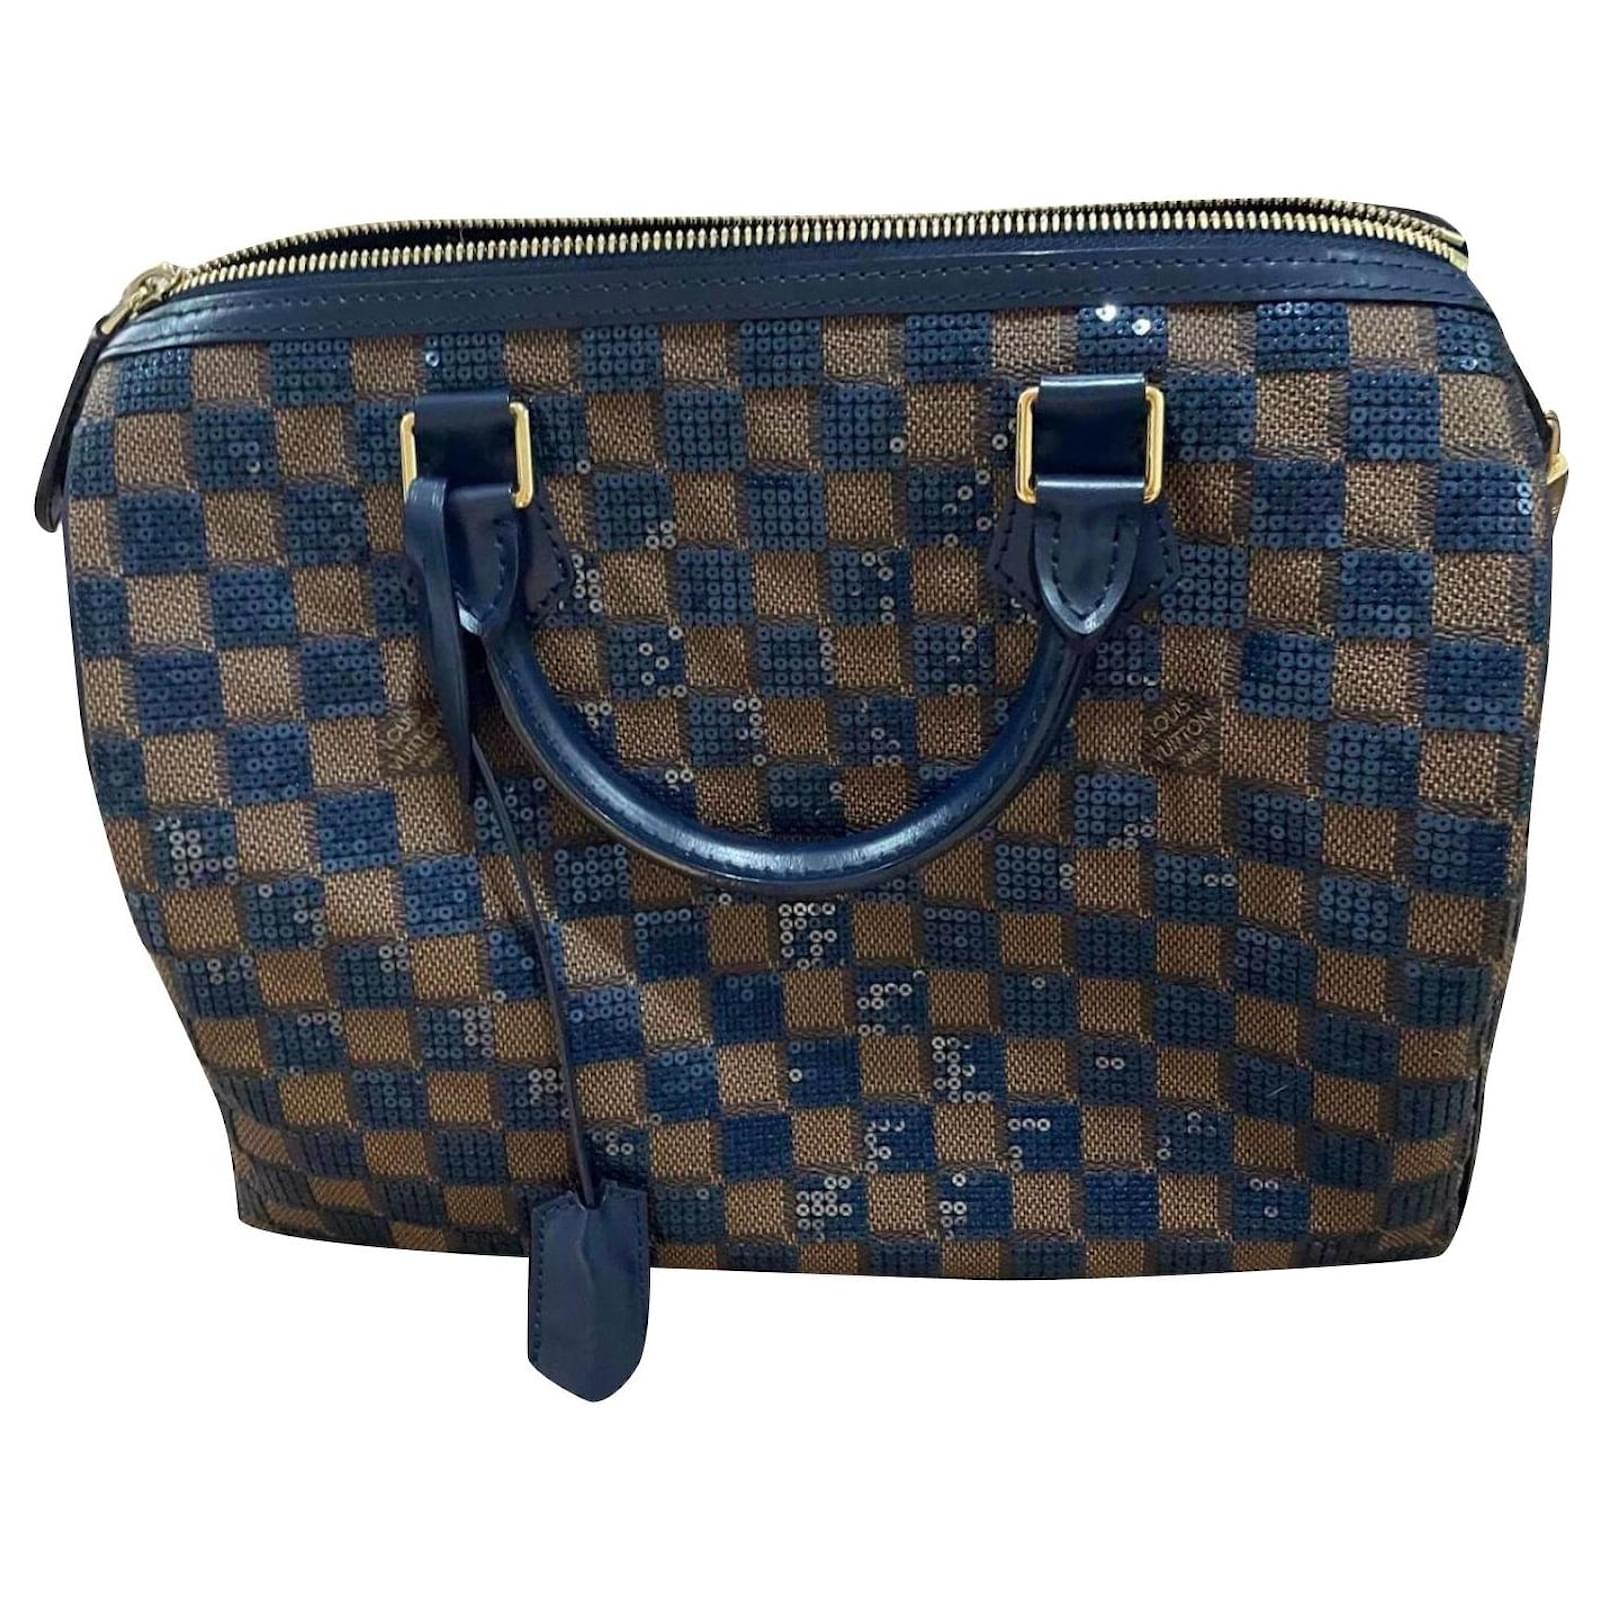 louis vuitton limited edition bags 2021